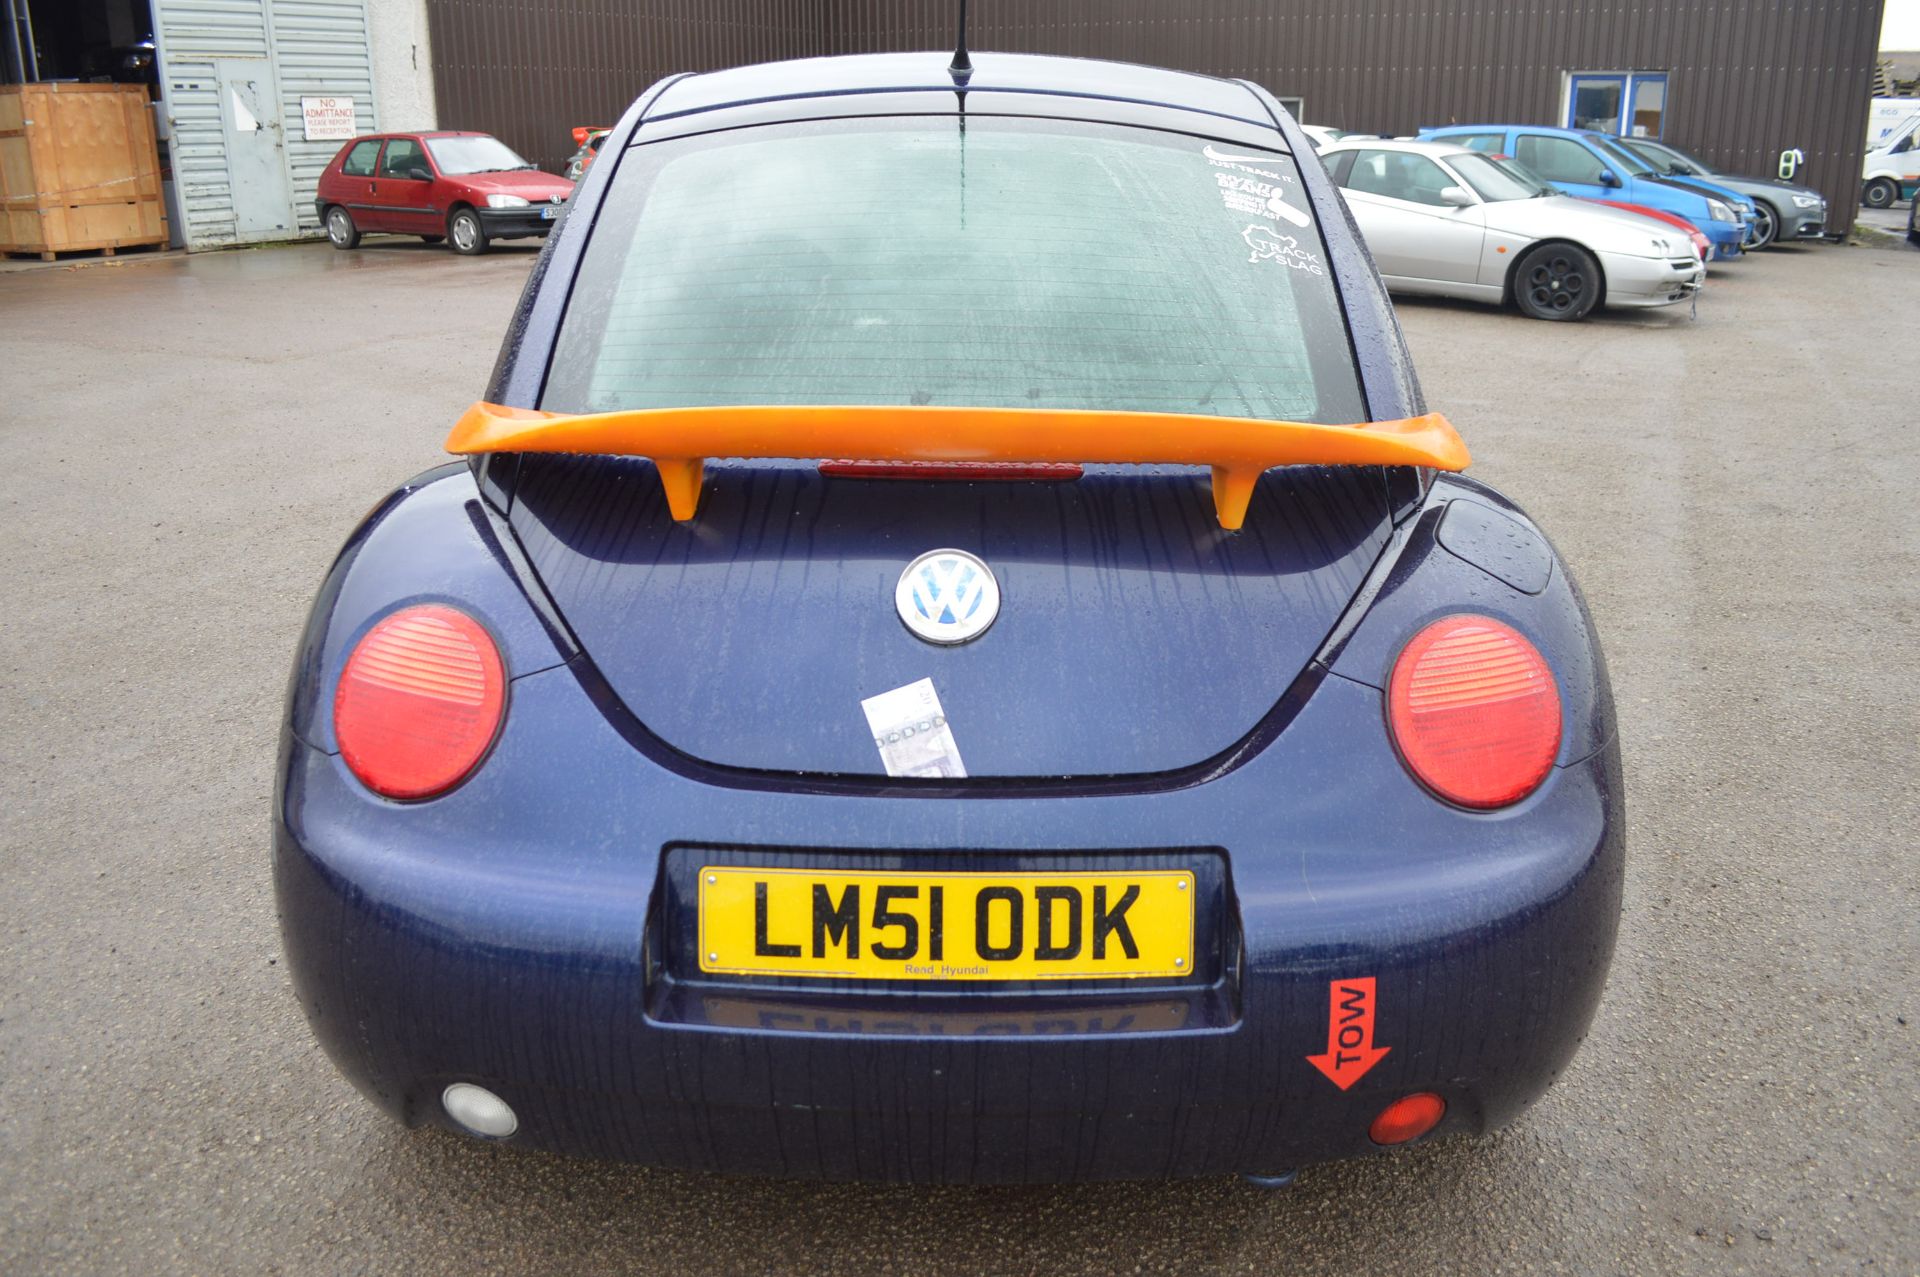 2001/51 REG VOLKSWAGEN BEETLE TURBO 1.8 TRACK CAR 5 SPEED MANUAL GOOD STRONG ENGINE AND BOX HAS JUST - Image 5 of 15